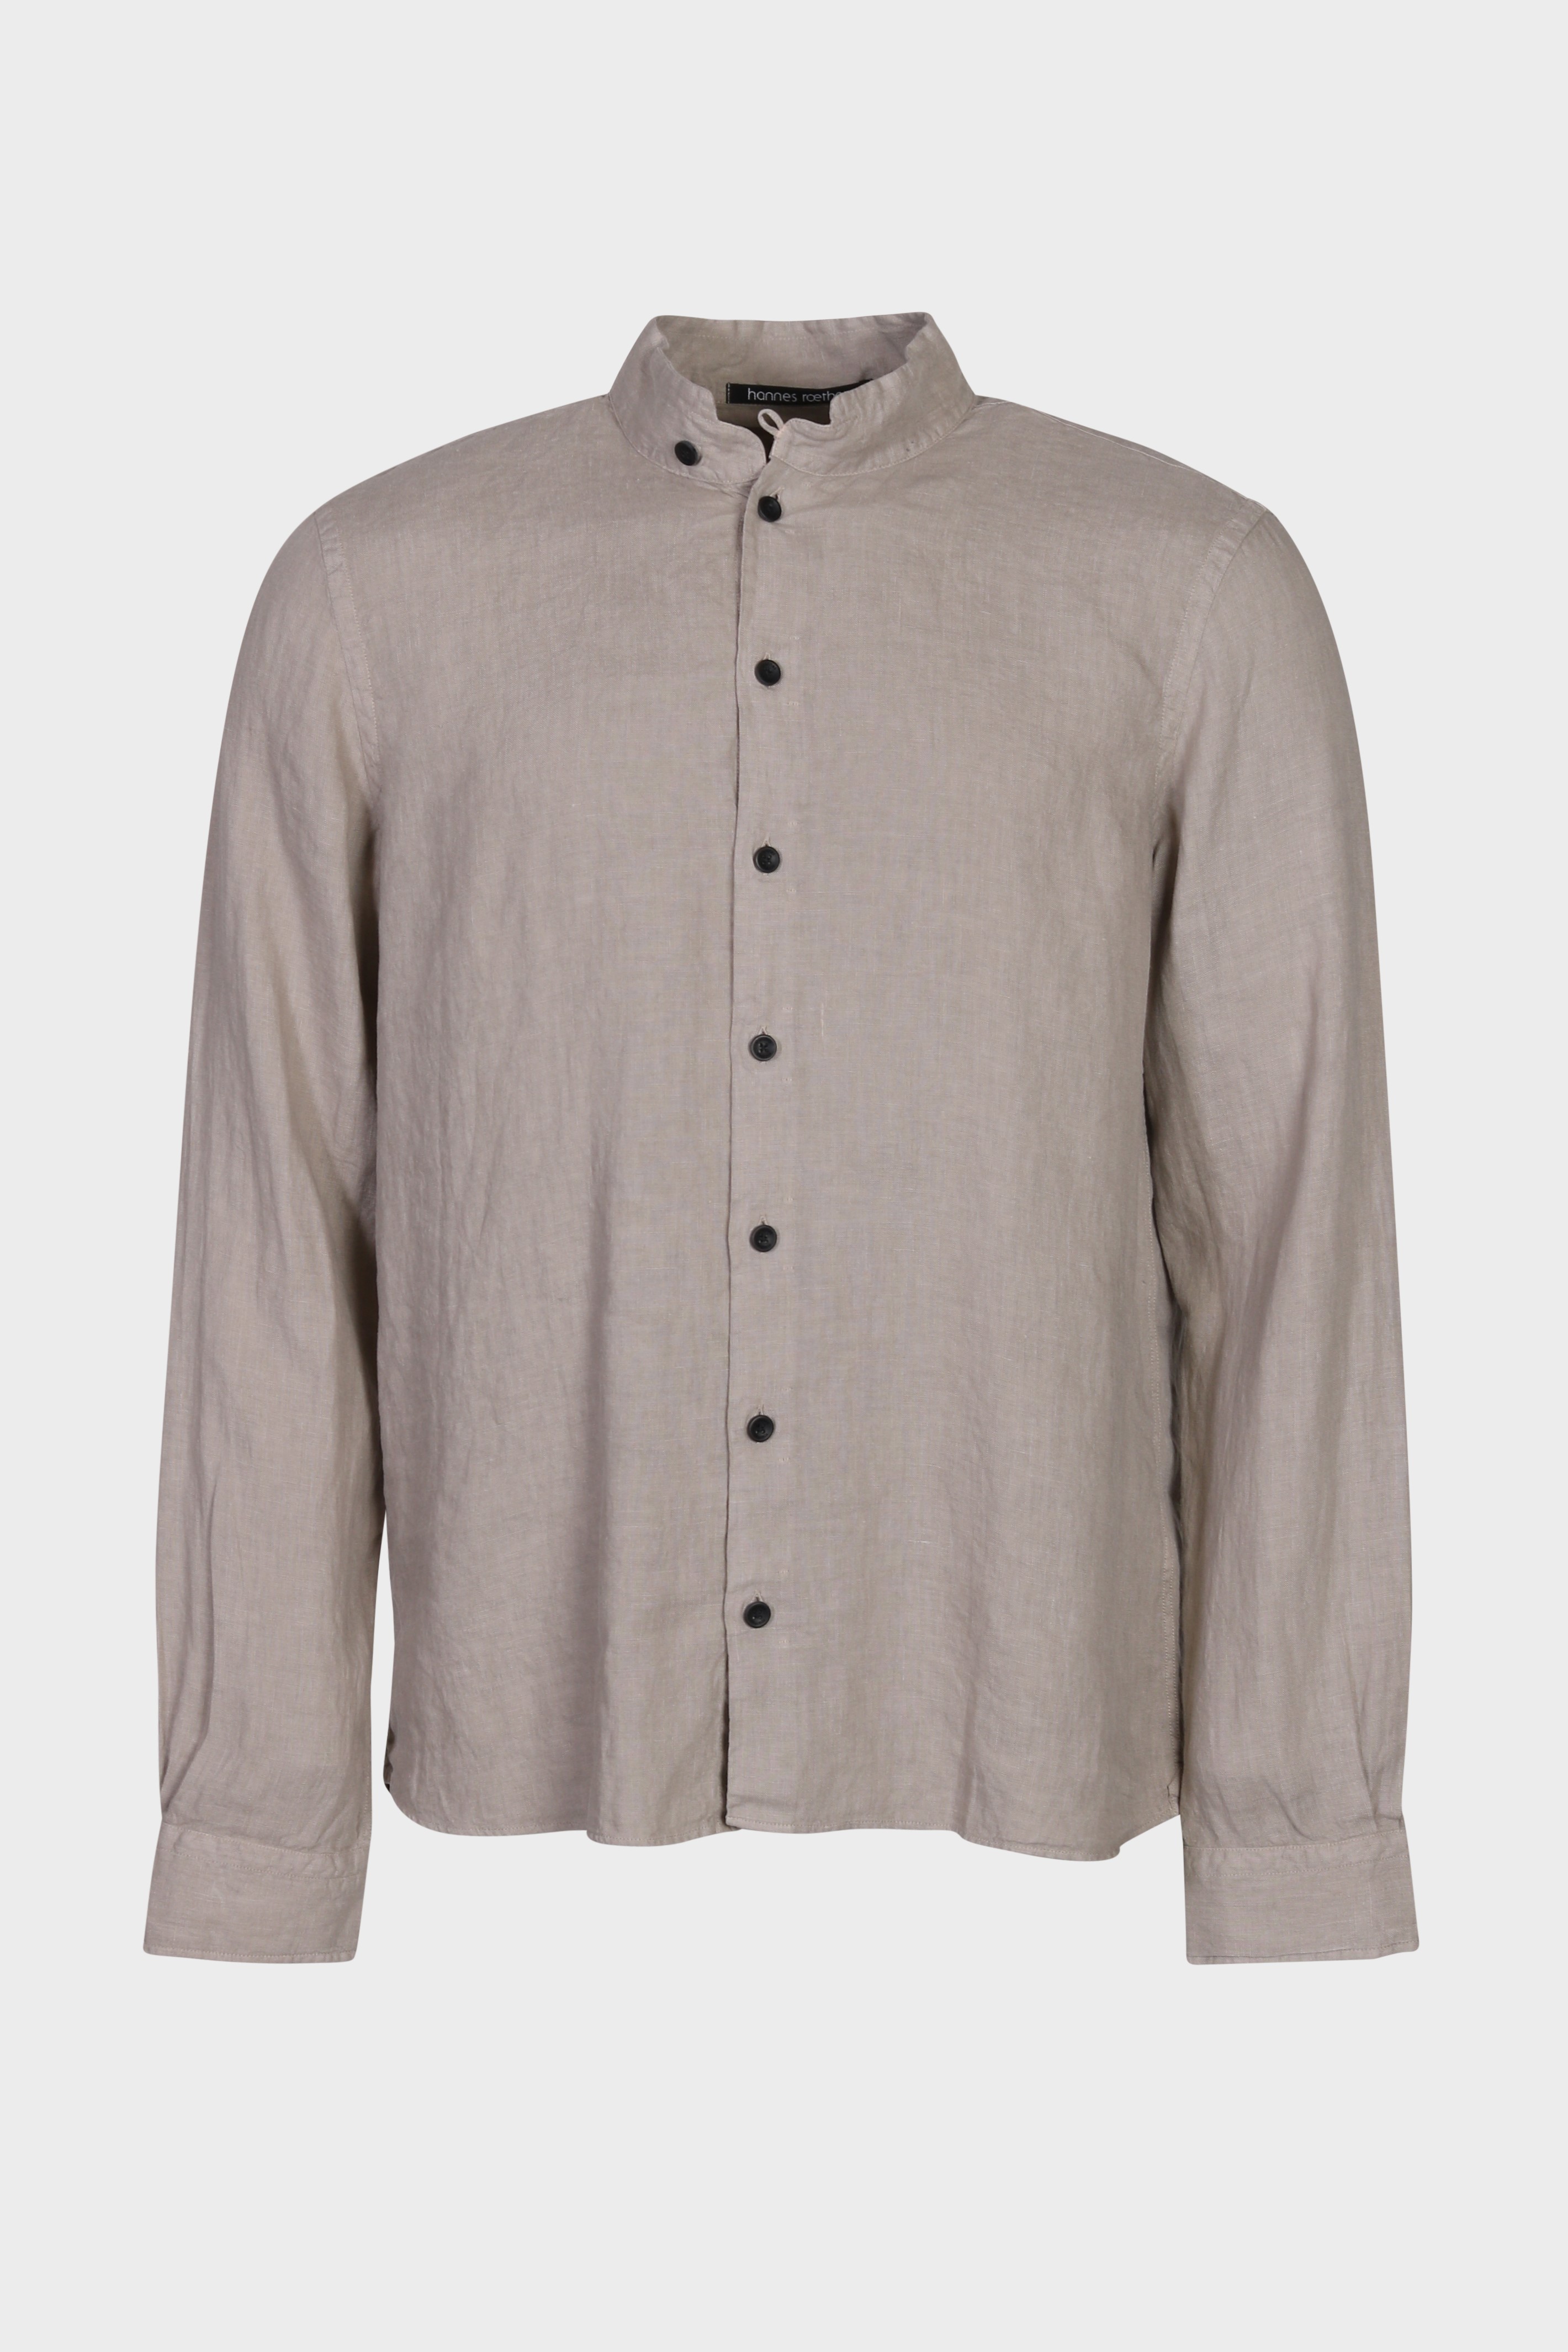 HANNES ROETHER Linen Shirt in Taupe